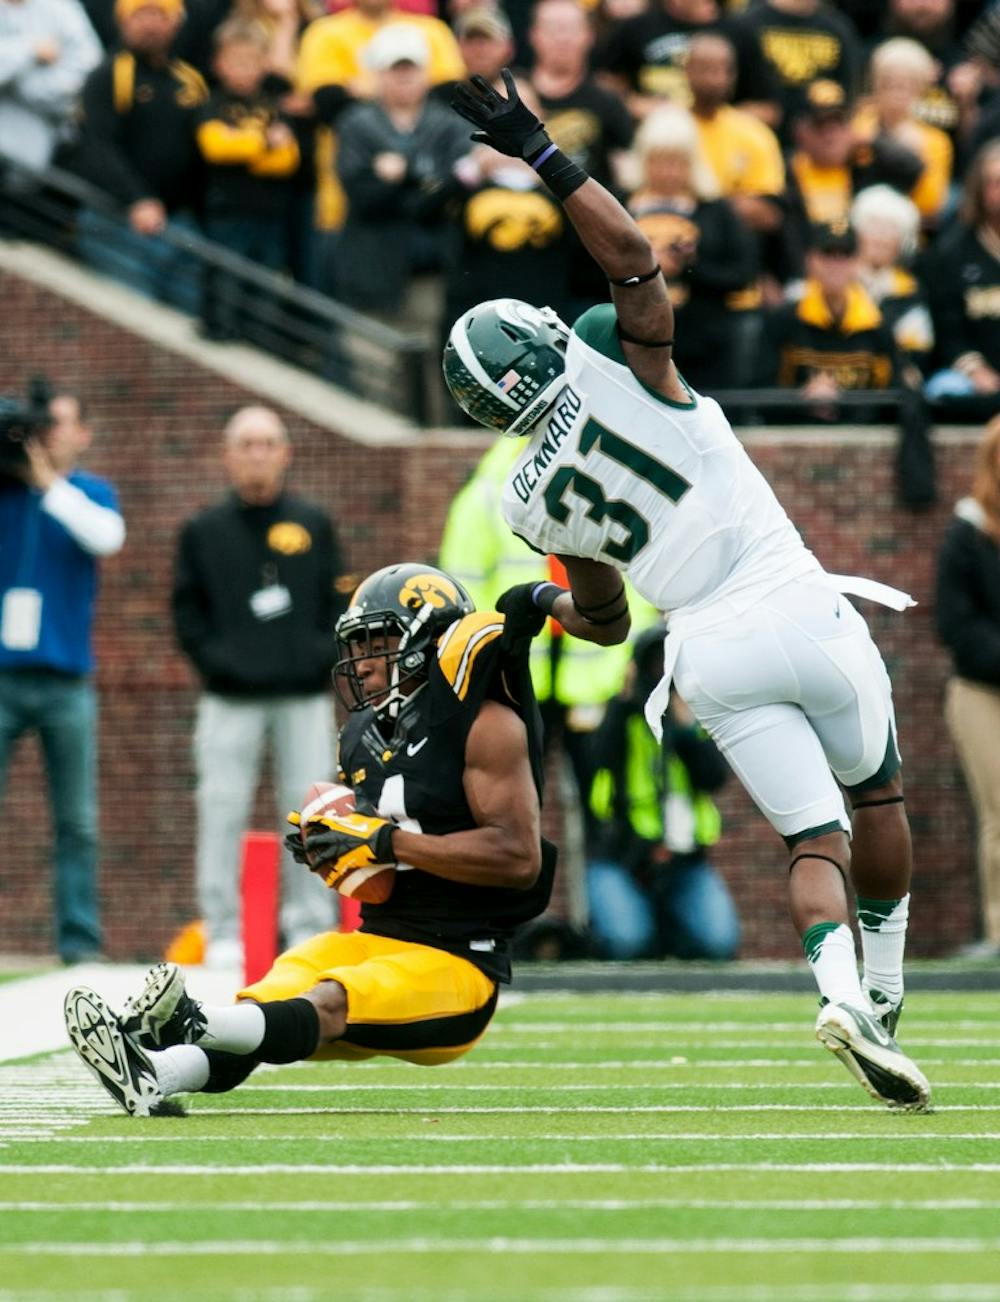 	<p>Senior cornerback Darqueze Dennard takes down Iowa wide receiver Tevaun Smith during the game Oct. 5, 2013, at Kinnick Stadium in Iowa City, Iowa. The Hawkeyes are leading the Spartans 14-10 at halftime. Danyelle Morrow/The State News</p>